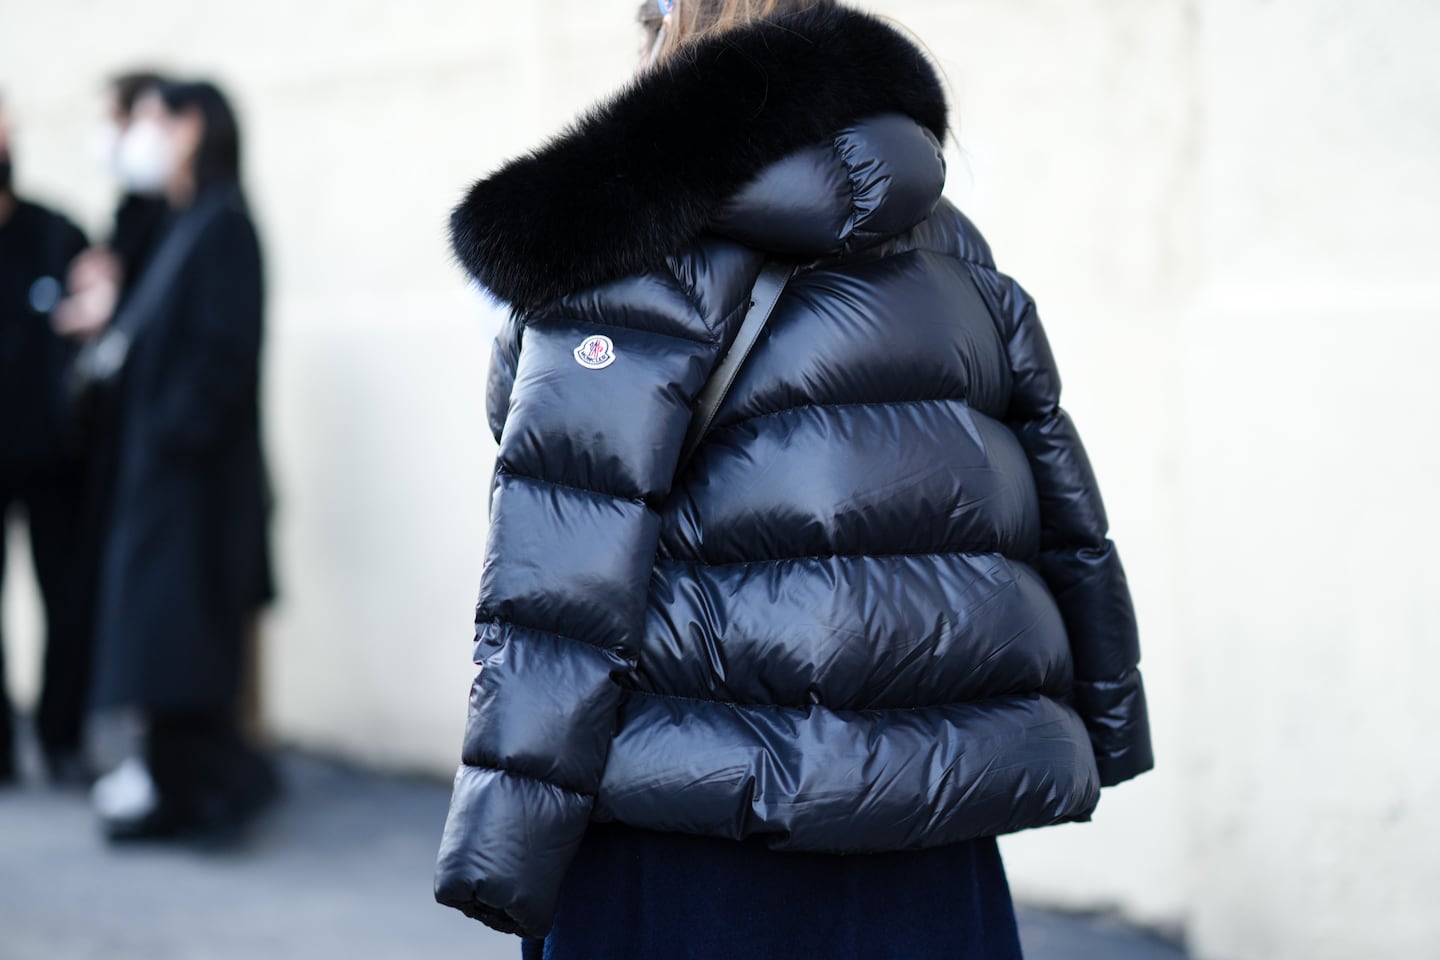 A guest wears a Moncler puffer jacket at Milan Men's Fashion Week on January 15, 2022. Moncler announced in January that it will stop using fur in all products by A/W 2023.